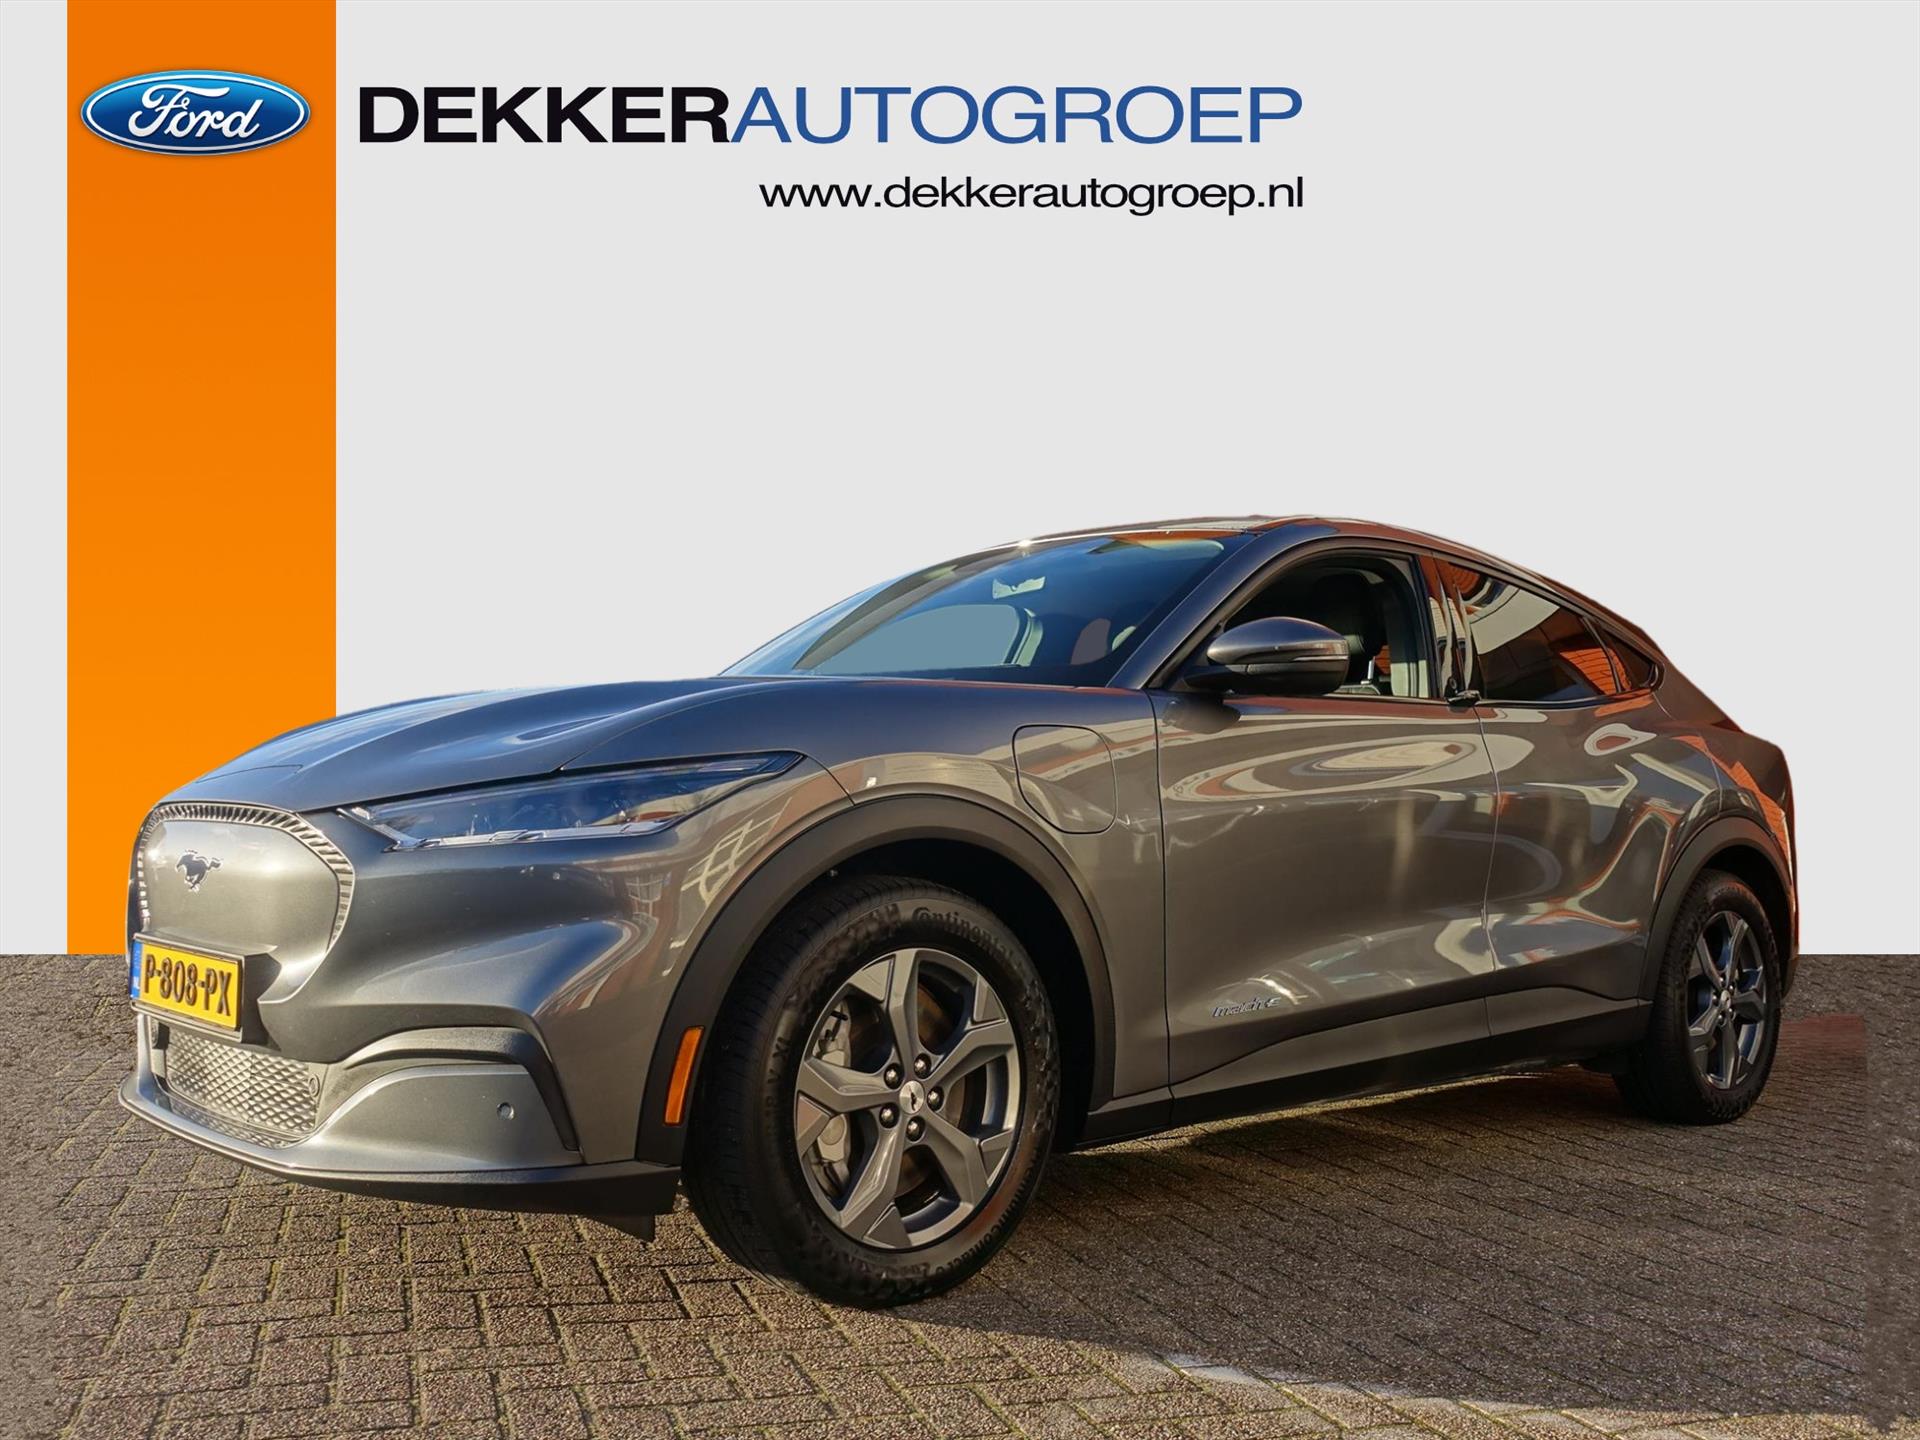 Ford Mustang Mach-E 75kWh 258pk RWD Automaat 8% bijtelling bij viaBOVAG.nl